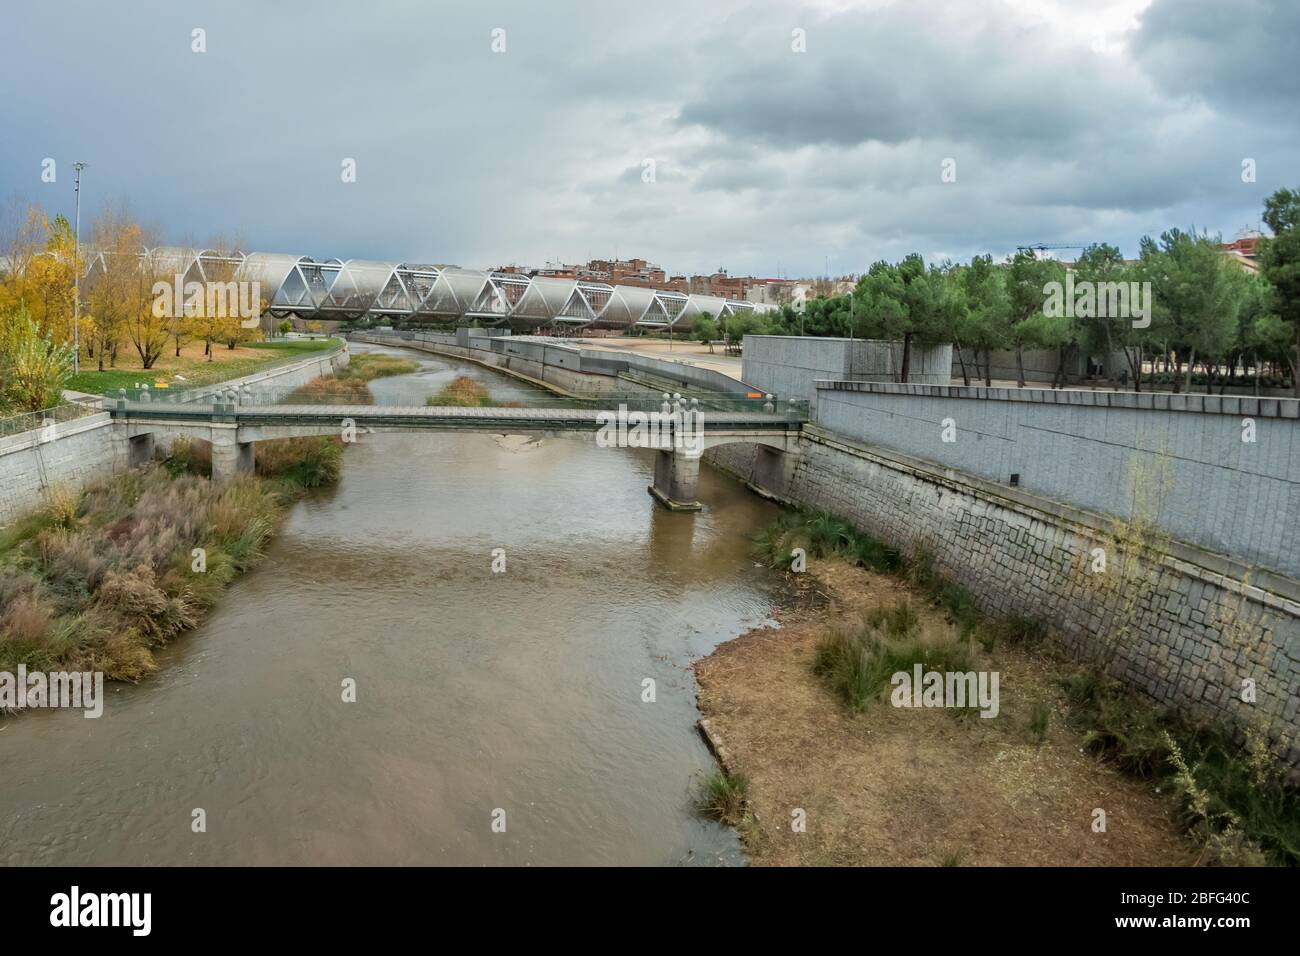 MADRID, SPAIN - DECEMBER 13, 2018: The Arganzuela bridge over Manzanares River downtown Madrid, Spain. It is a futuristic structure built in 2011. Sup Stock Photo